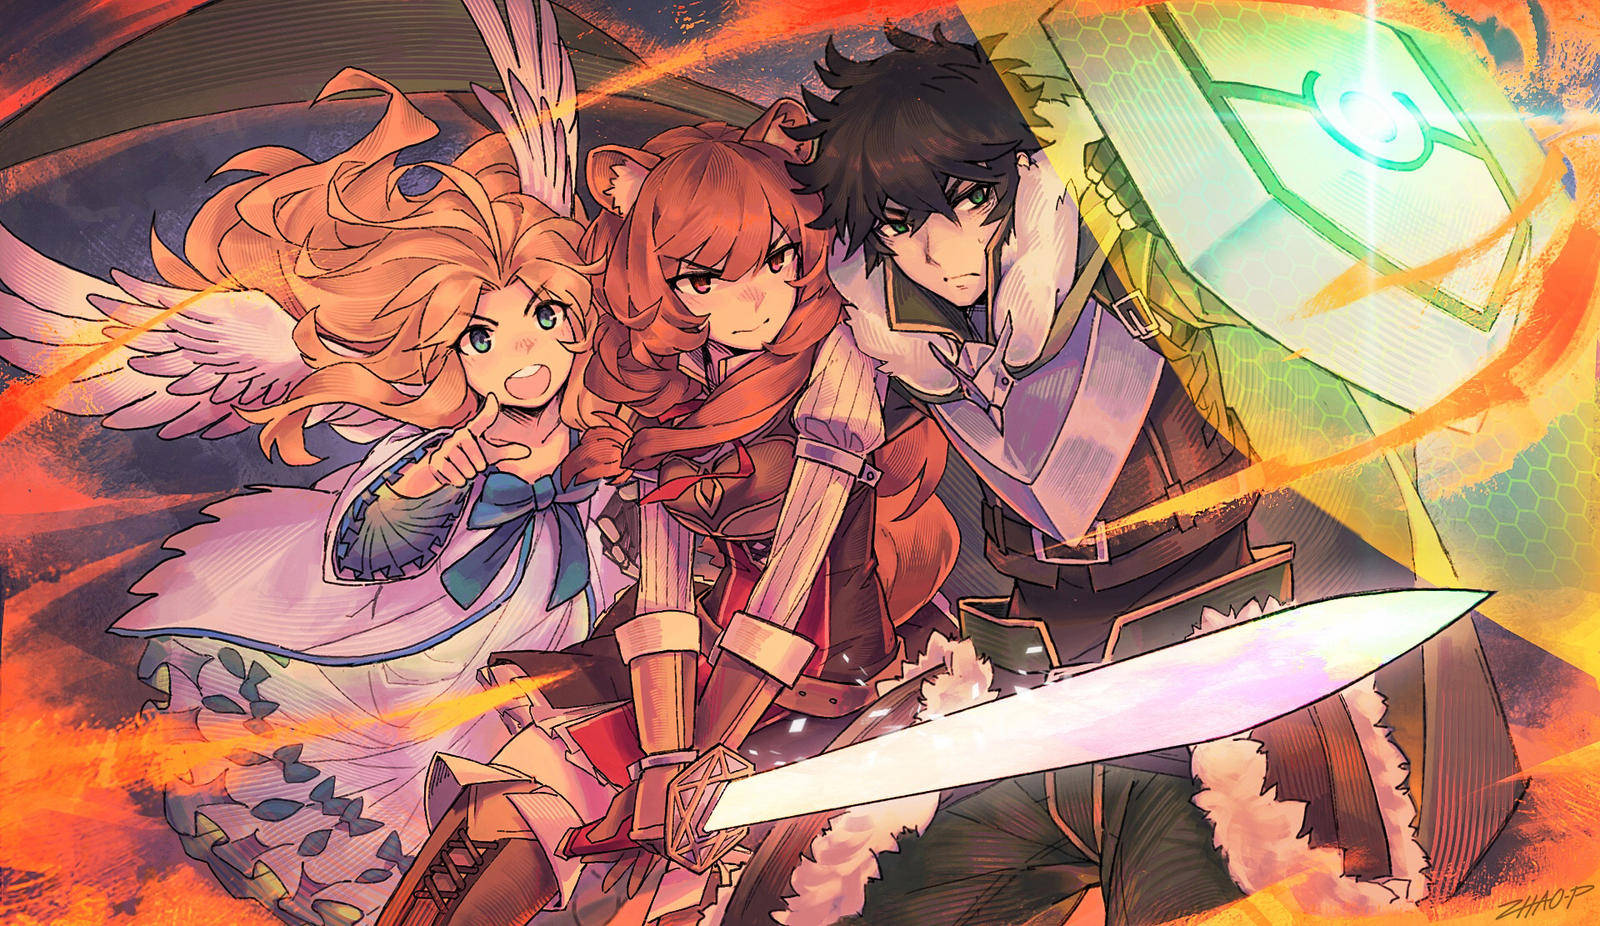 A Group Of Anime Characters With Swords And Wings